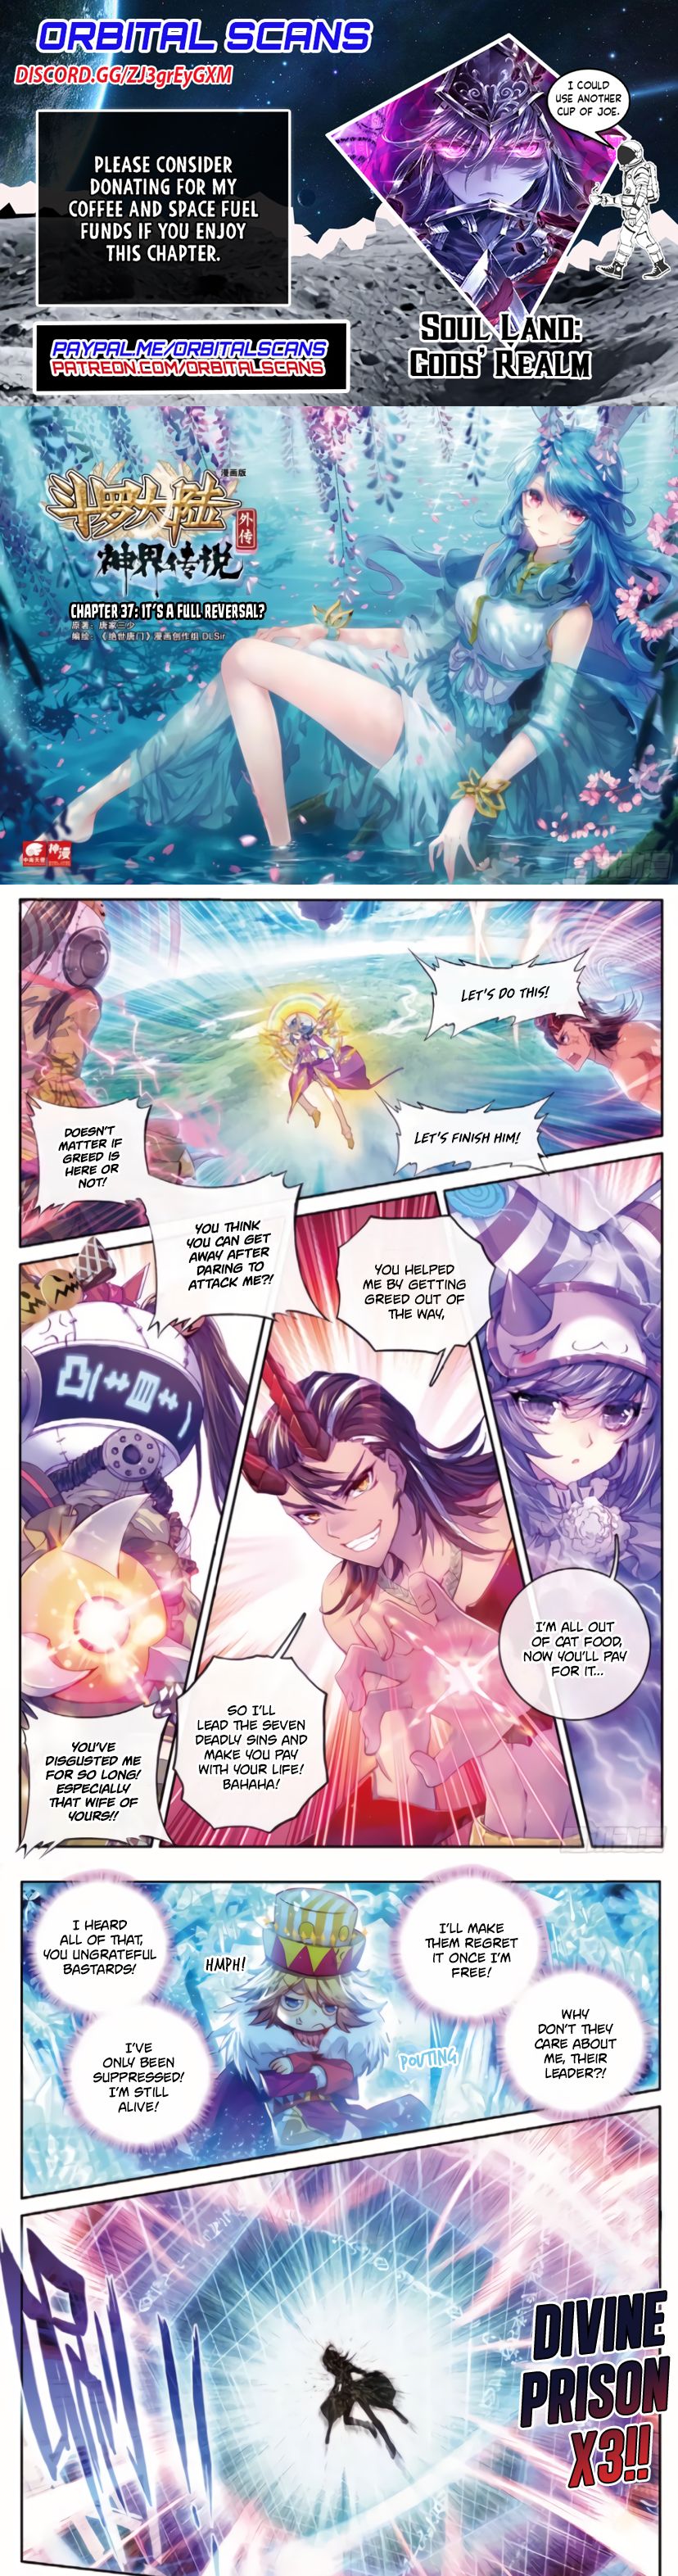 Soul Land - Legend Of The Gods' Realm - Page 1